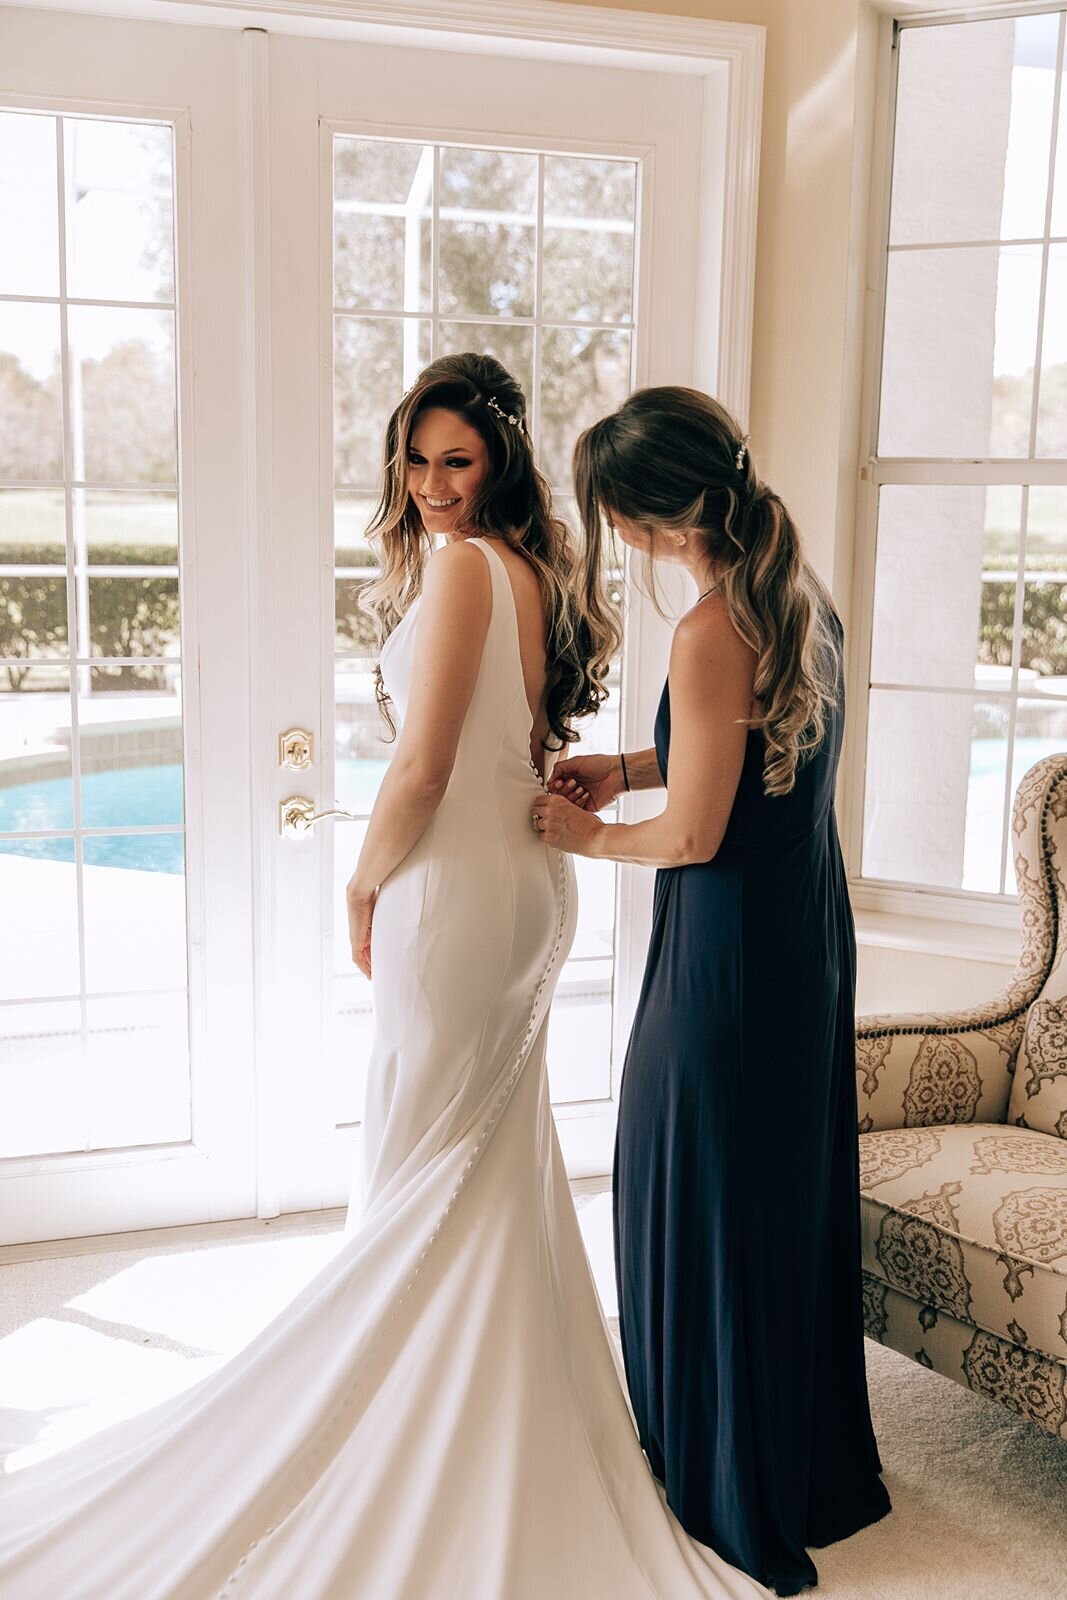 bride getting ready and her best friend zips up her dress